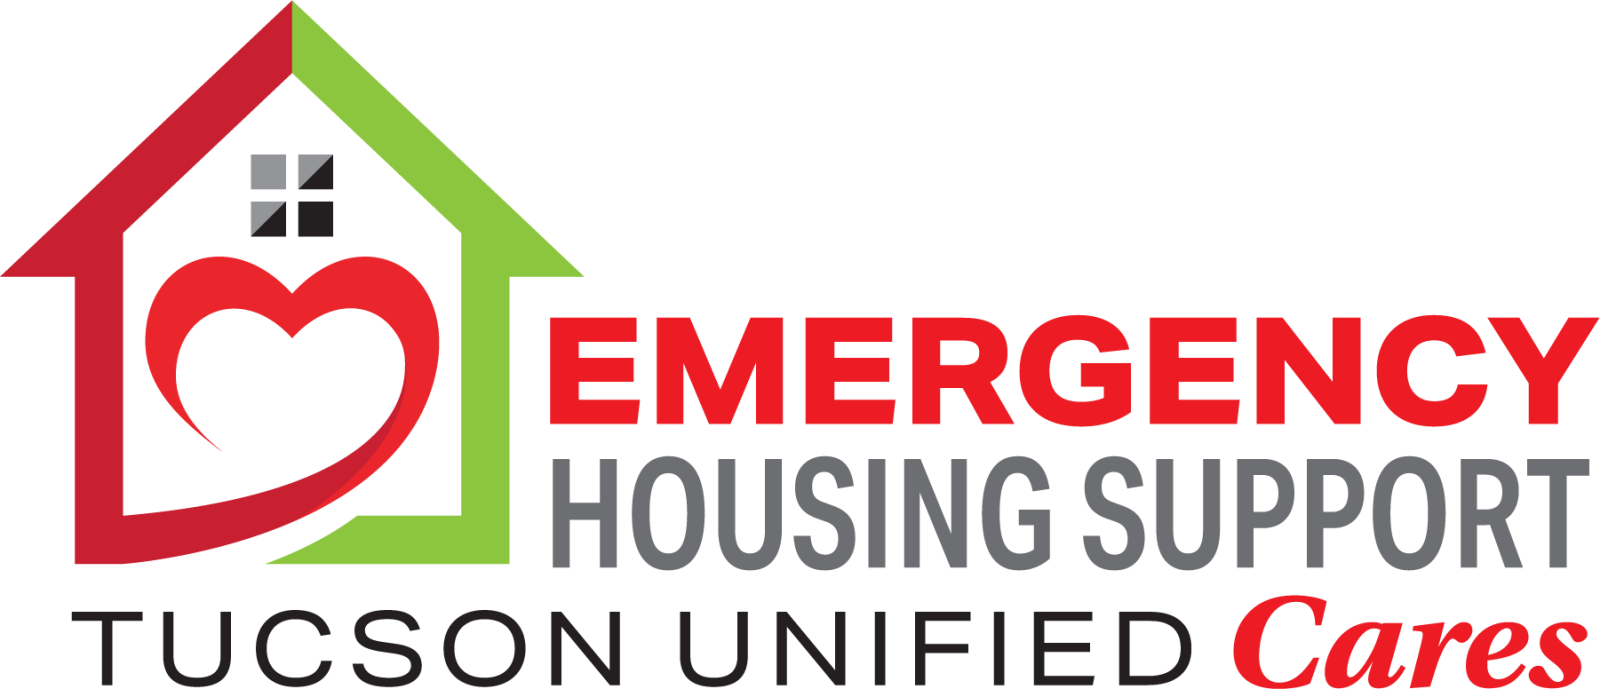 Emergency Housing Support Tucson Unified Cares logo